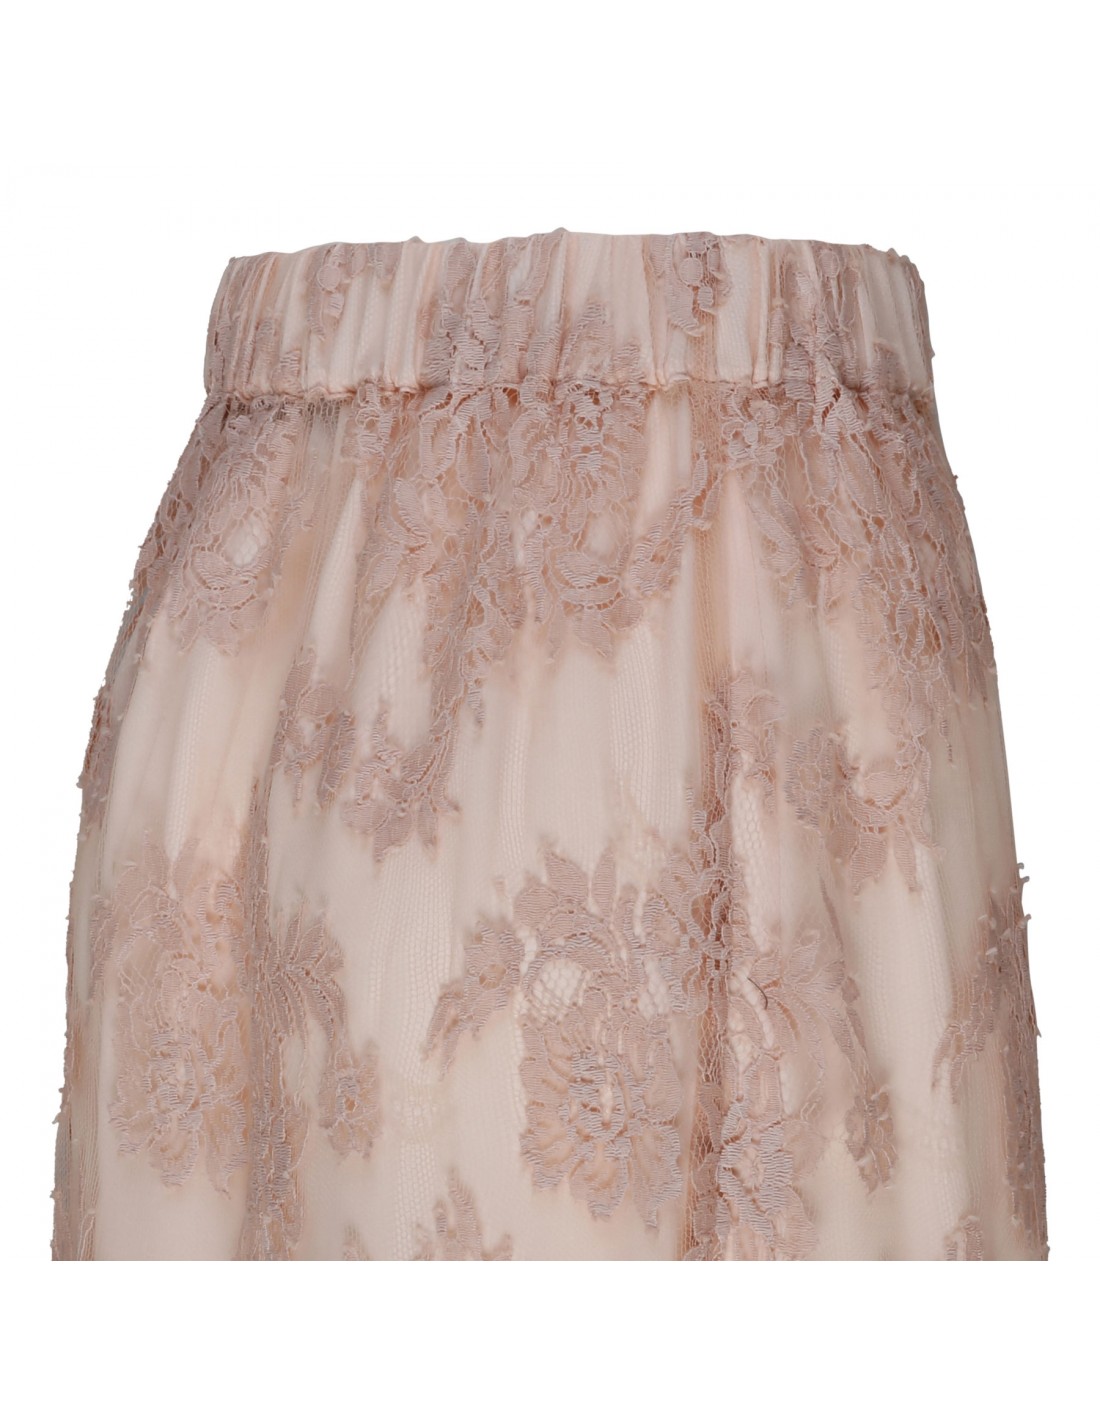 Floral lace skirt